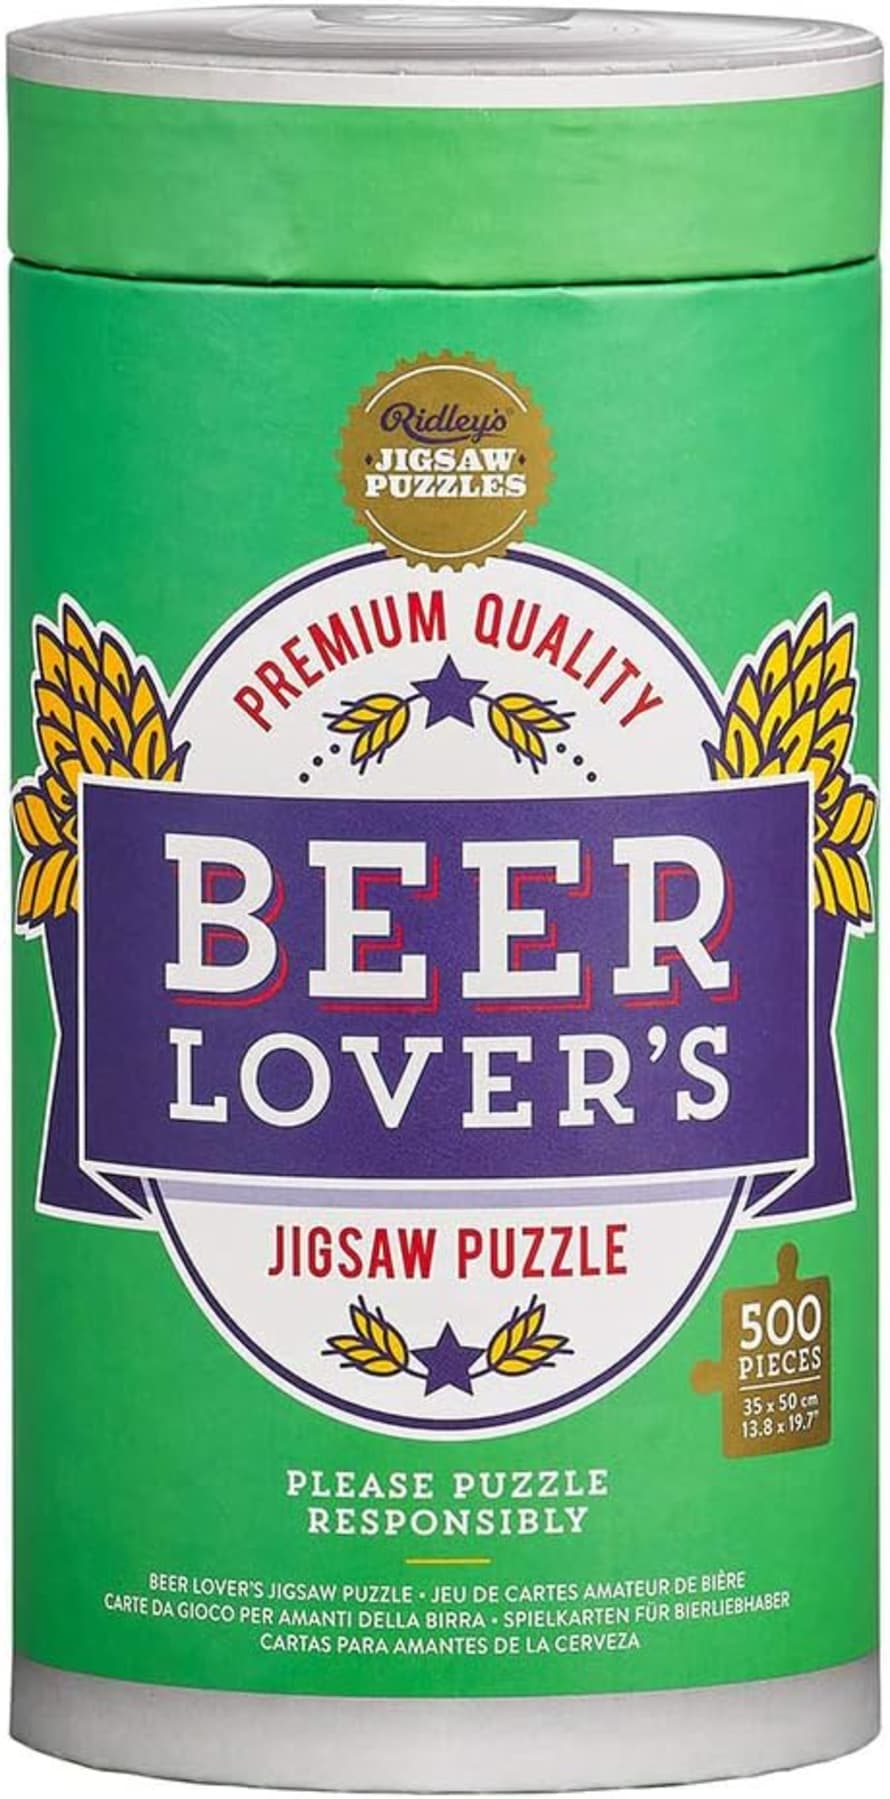 Ridleys Beer Lover's 500 Piece Puzzle